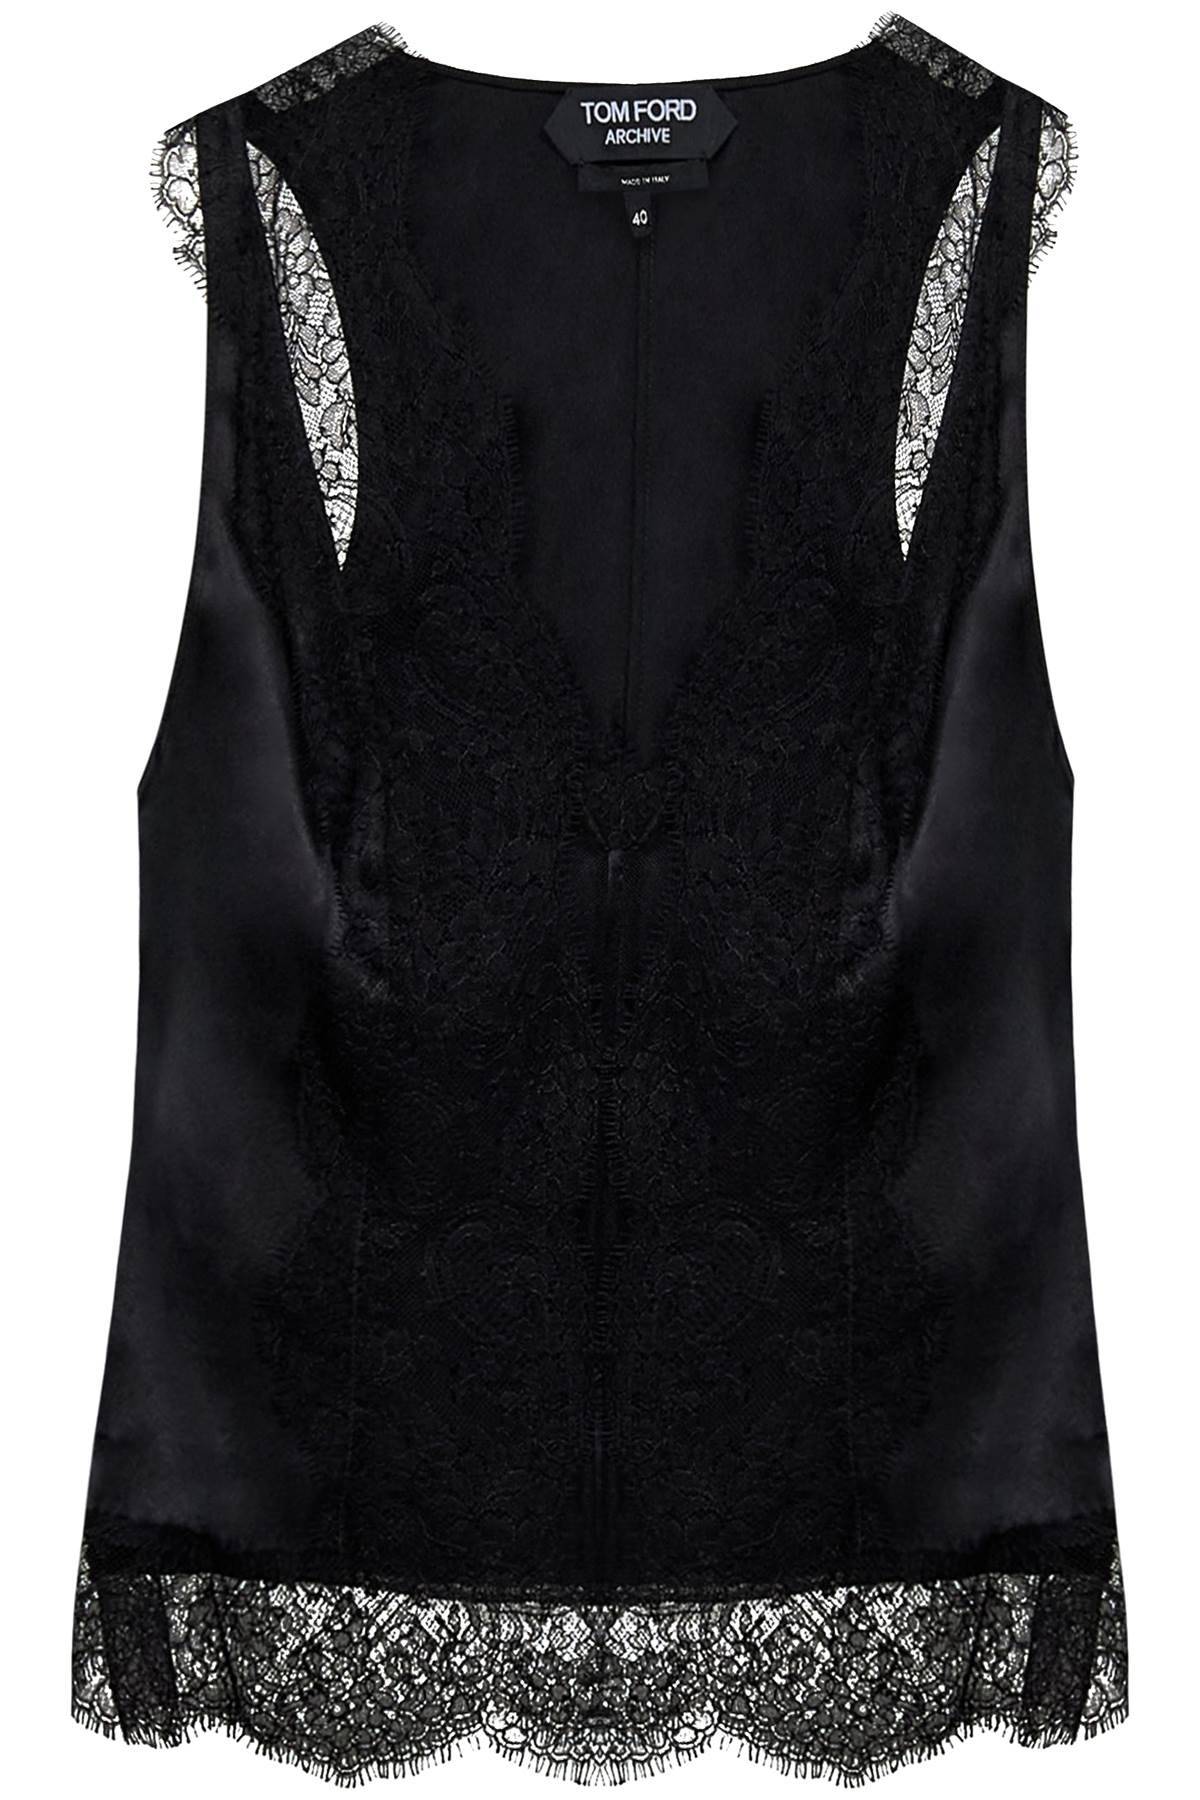 Tom Ford TOM FORD satin tank top with chantilly lace